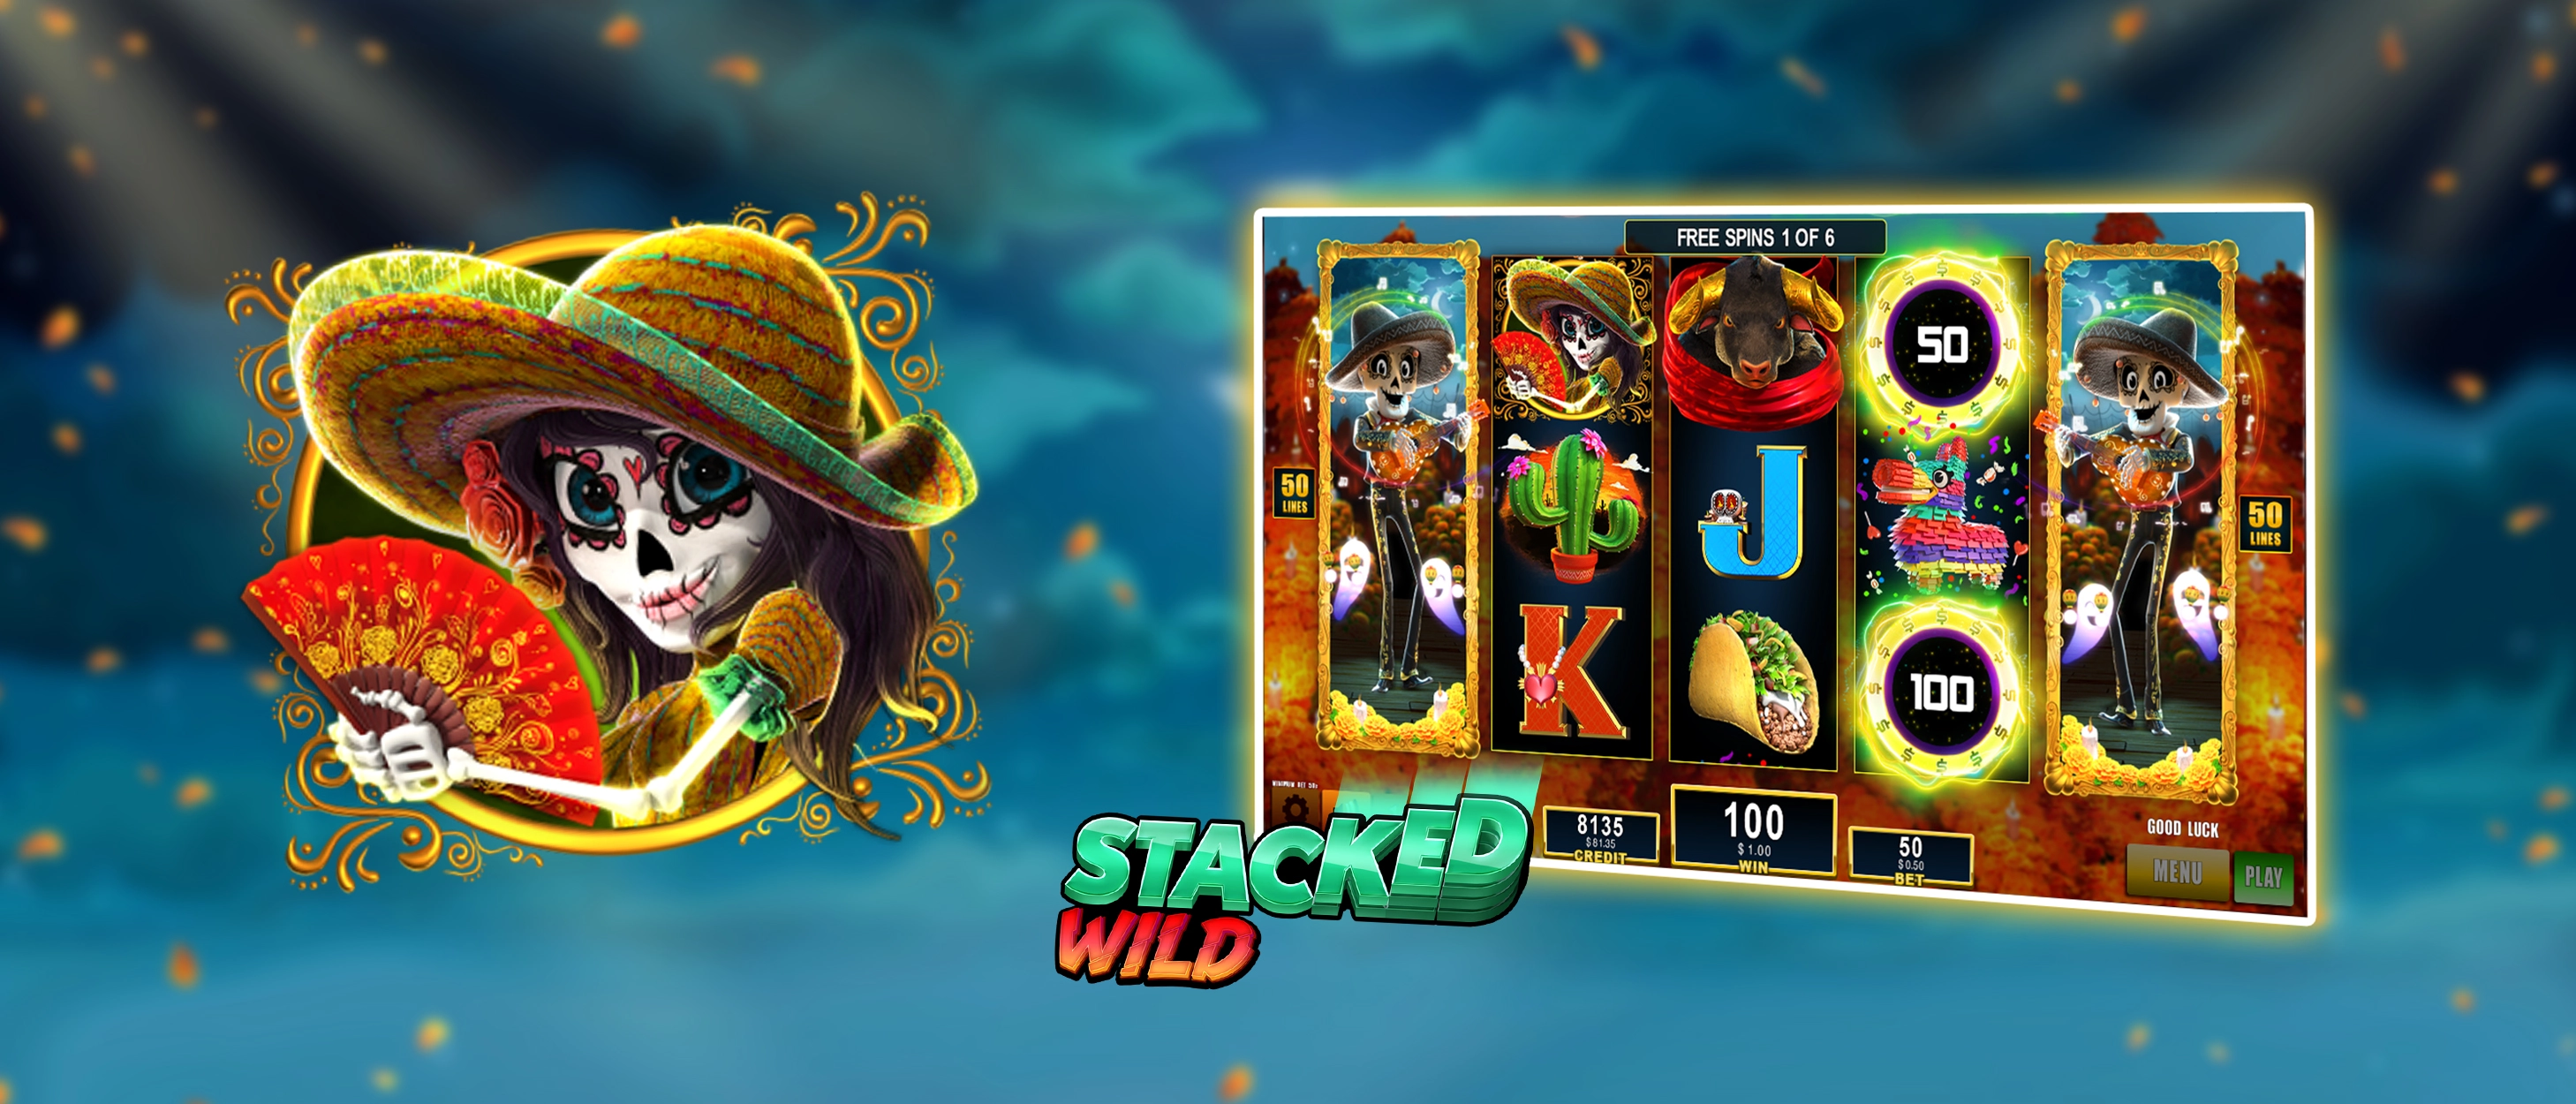 The image includes a game symbol of the slots title Viva Mexico and a game screen of the game with the Stacked Wild game feature active.